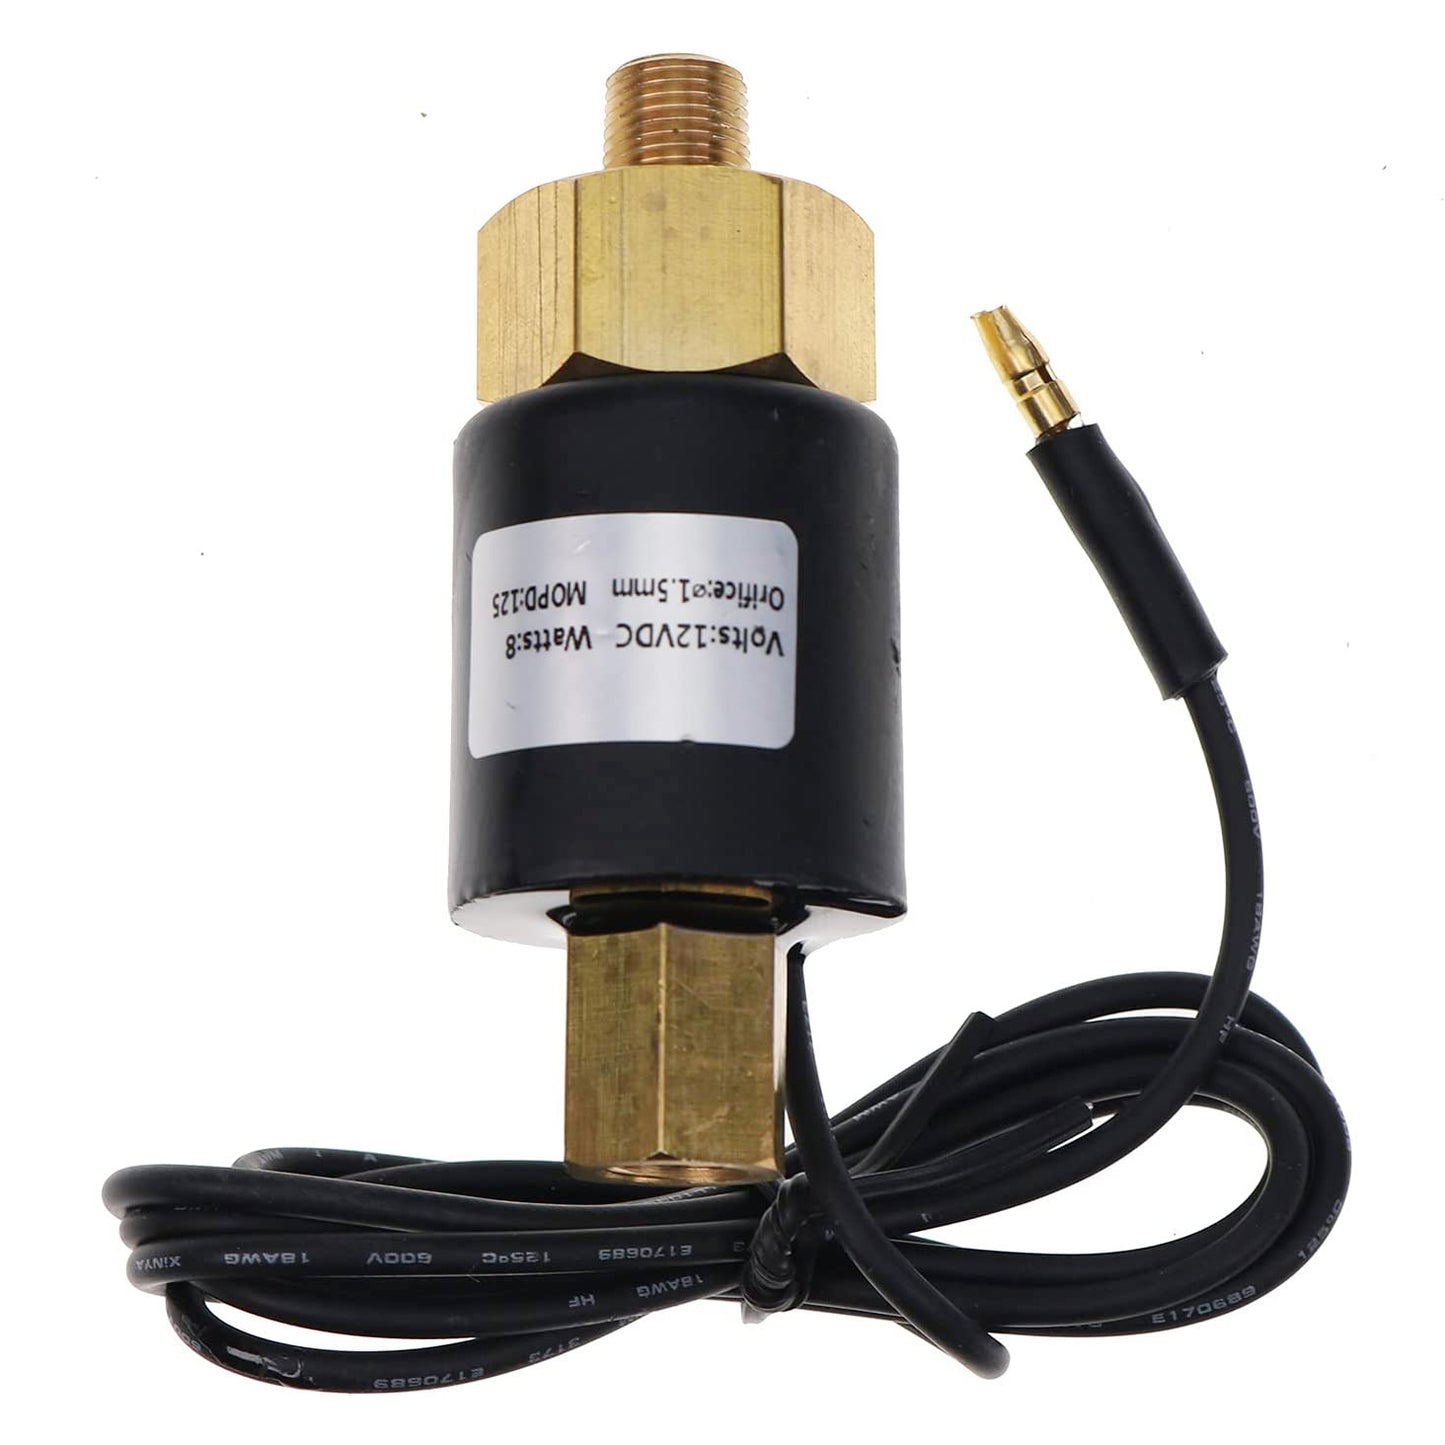 New Disc Brake Solenoid XF-205A Compatible with Dexter Tie Down Engineering Brake Actuator